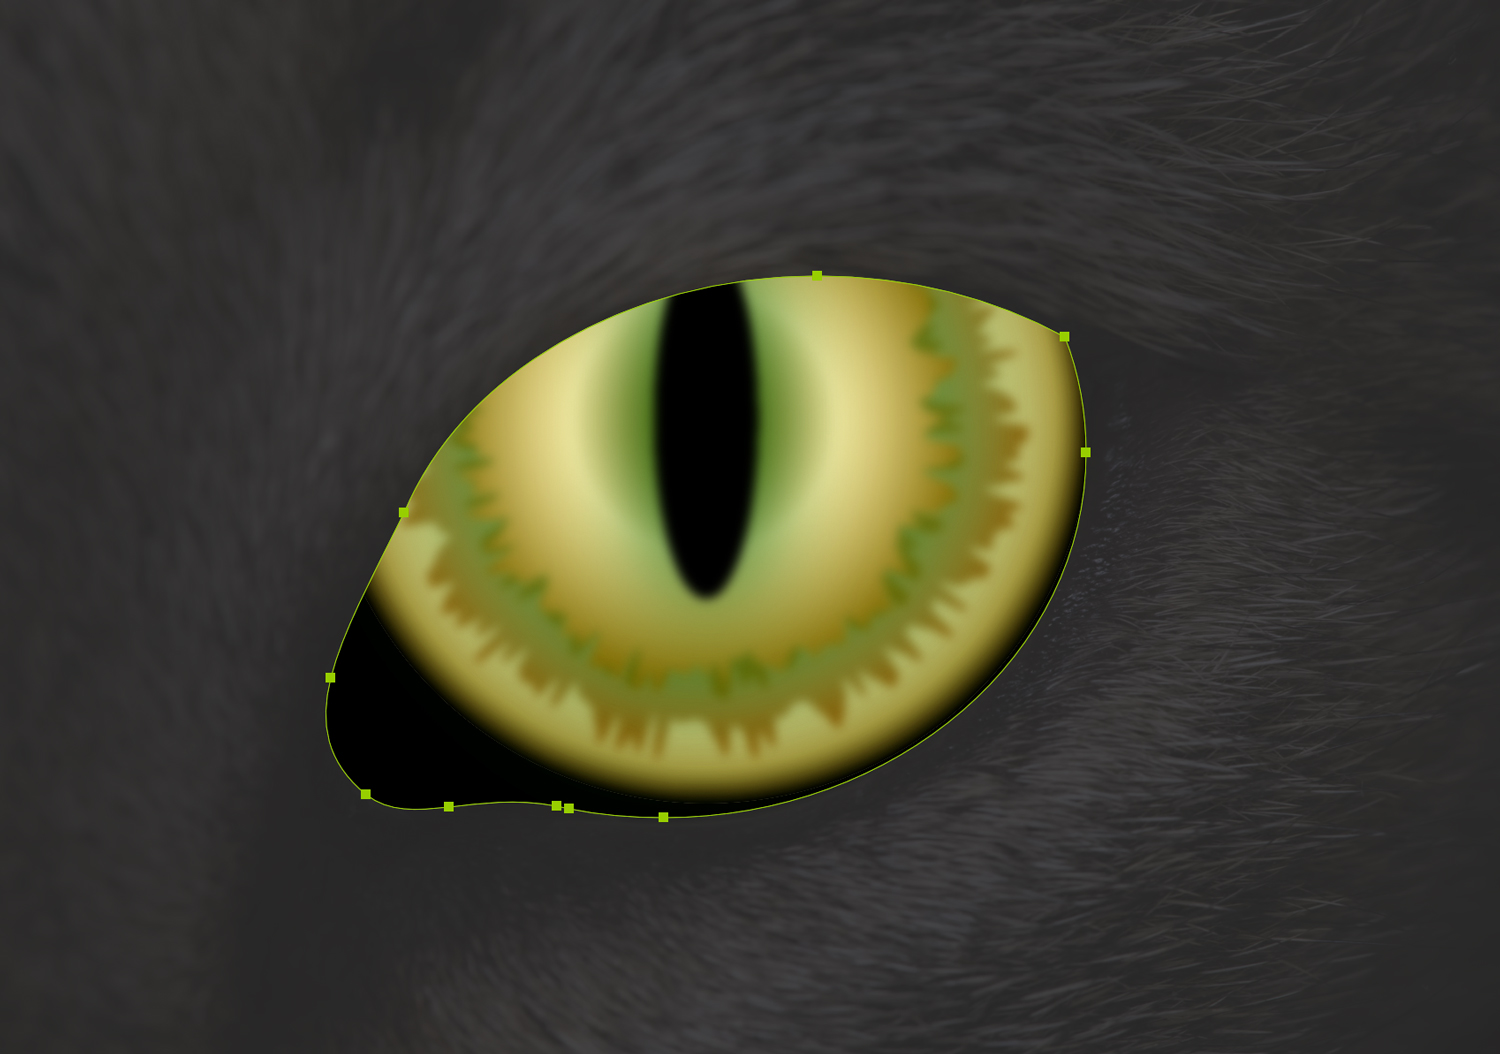 A green and yellow cat eye